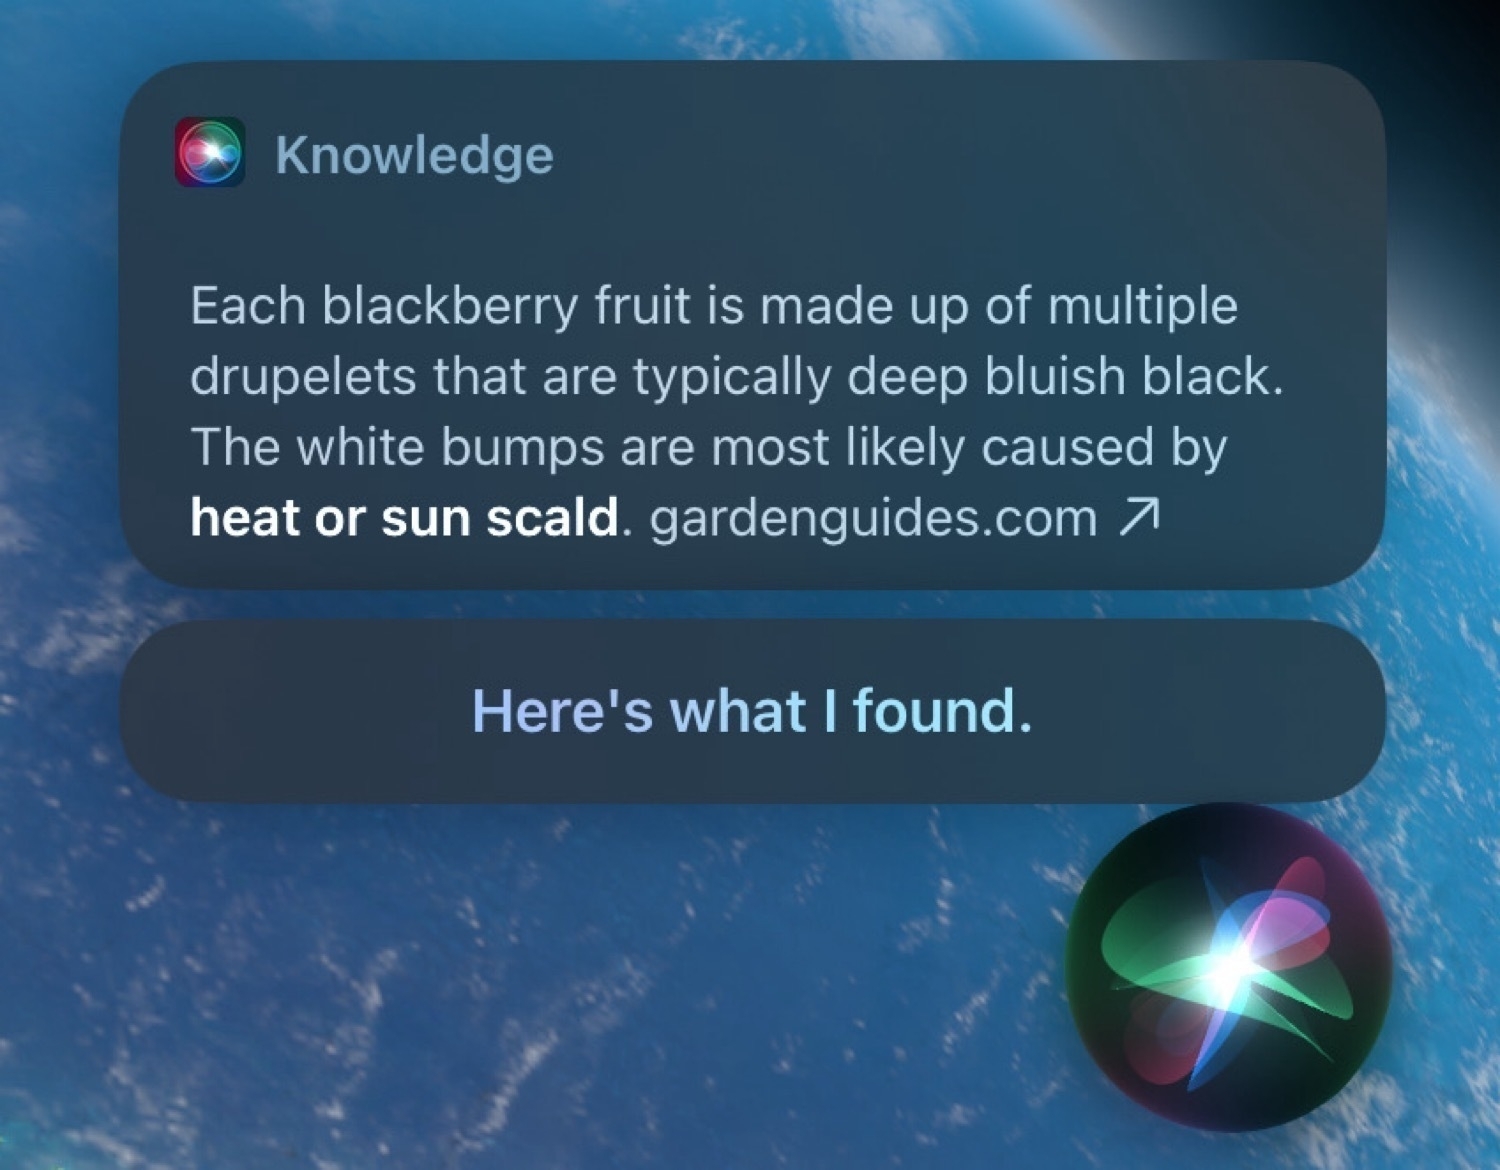 A screenshot of a Siri response with the following text: Each blackberry fruit is made up of multiple drupelets that are typically deep bluish black. The white bumps are most likely caused by heat or sun scald